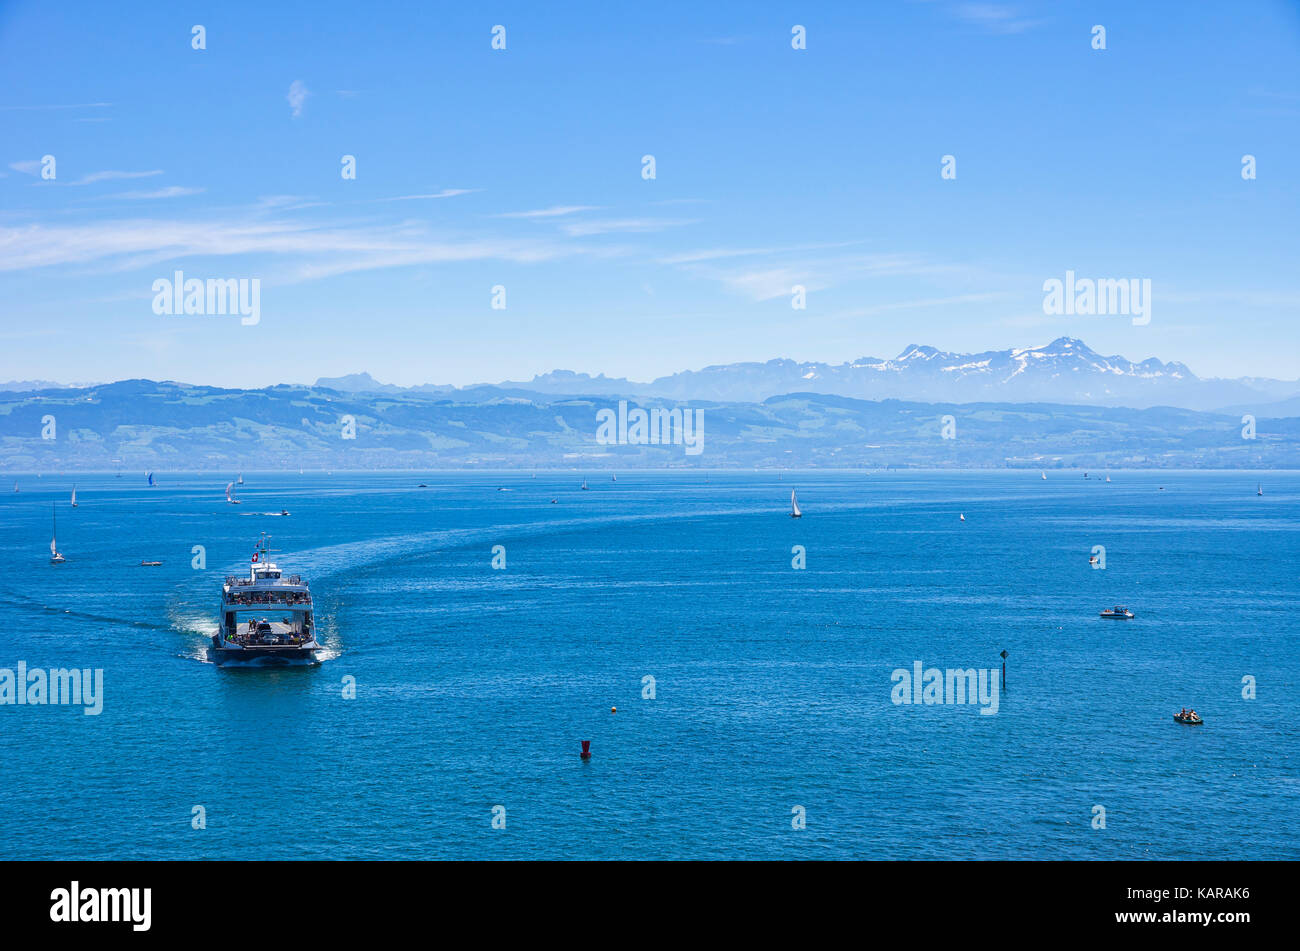 The car ferry ROMANSHORN on Lake Constance approaches the port of Friedrichshafen, Baden-Wurttemberg, Germany. Stock Photo